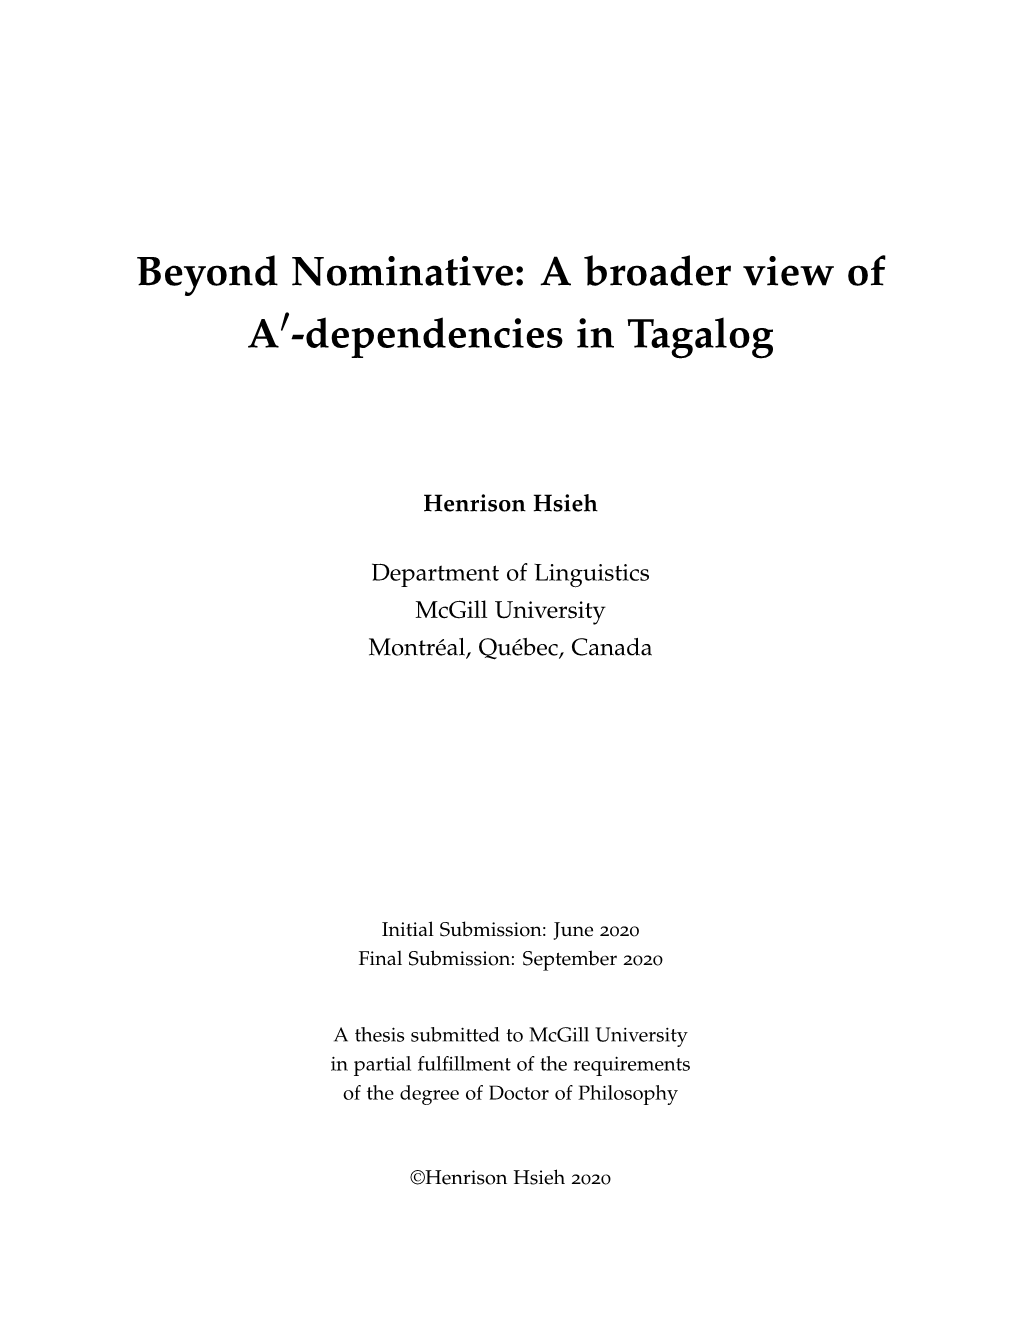 Beyond Nominative: a Broader View of A′-Dependencies in Tagalog